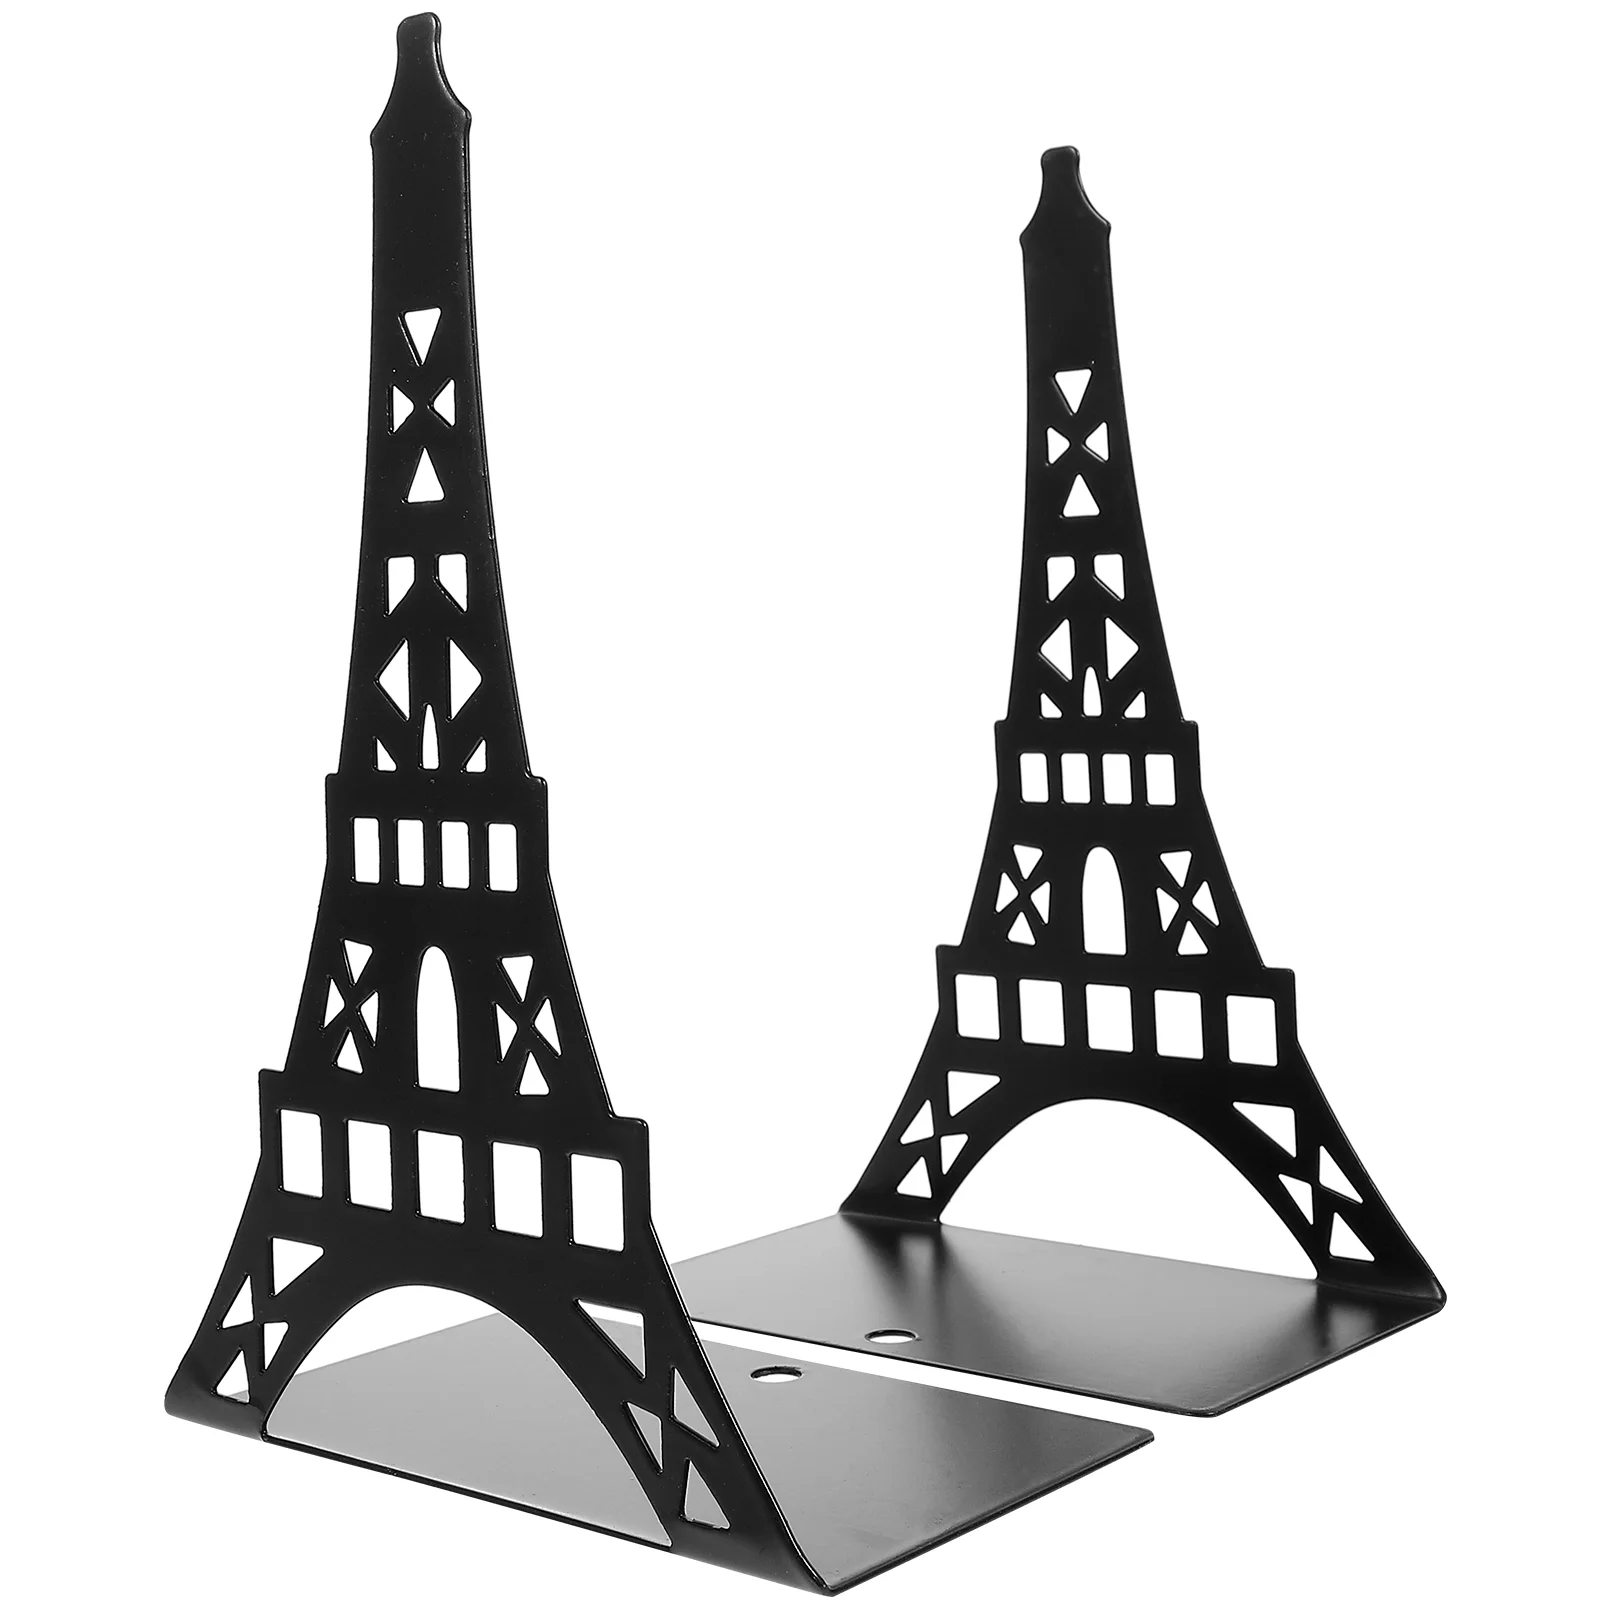 

2 Pcs Bookend Reusable Holders Bookcase Kids Room Tower Shape Stands Bookshelf File Organizer Metal Reading Ends Crafted Desk